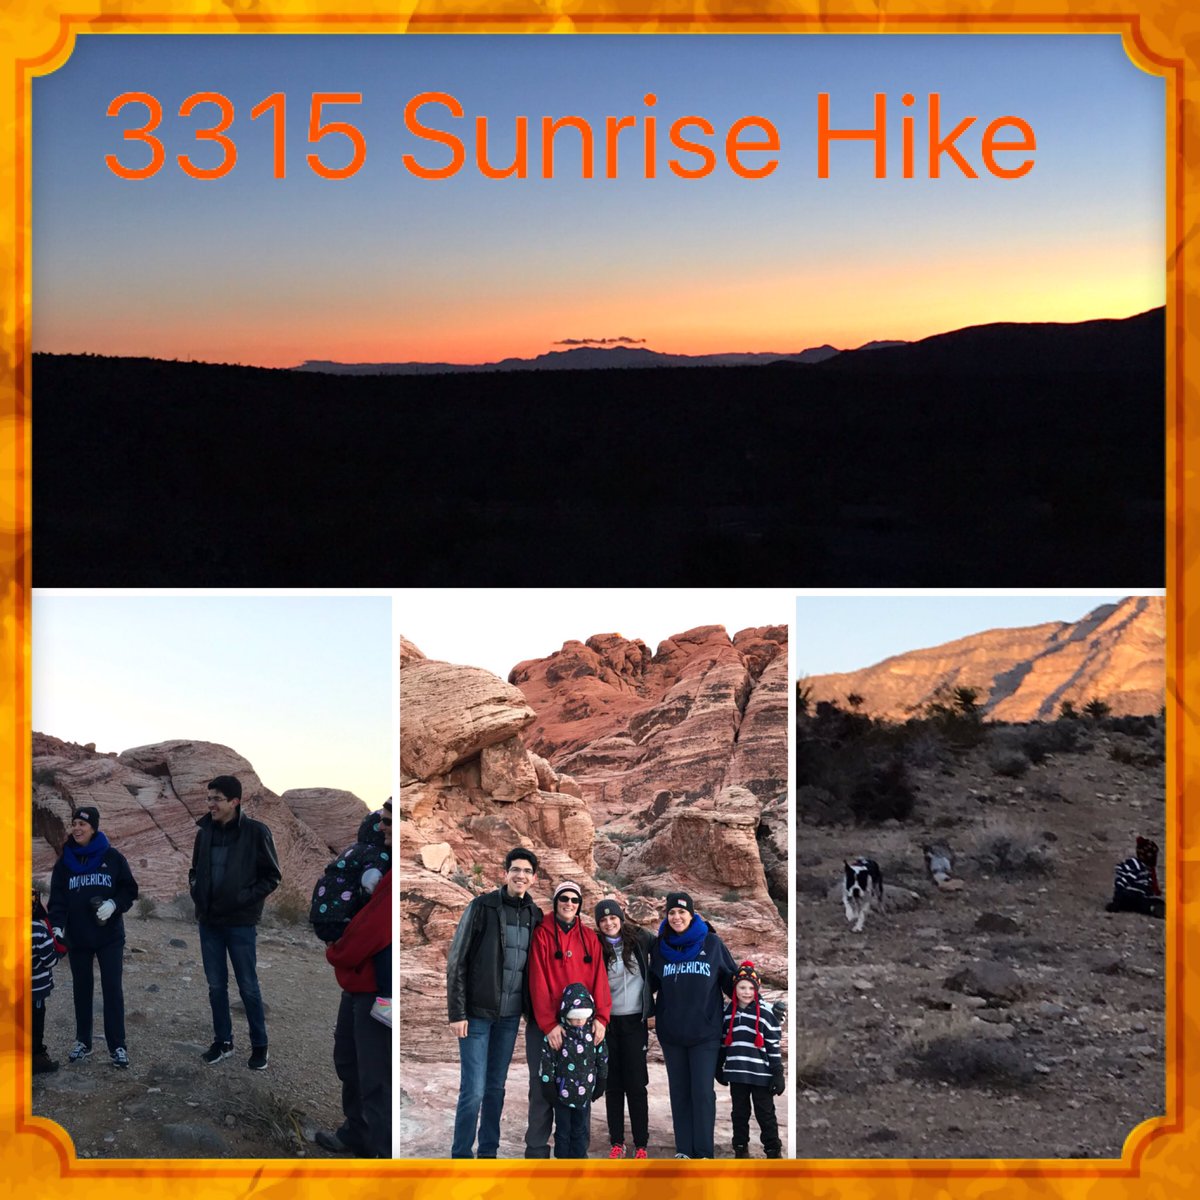 Our first hike of Hiking Club is in the books! It was a cold one but we made it and had a great time 😊 #3315 #hikingclub #redrock #stayhealthytogether  @FragoTiffani @davecrawford_HD @RumerVillalvazo @datriteray @amber_mical